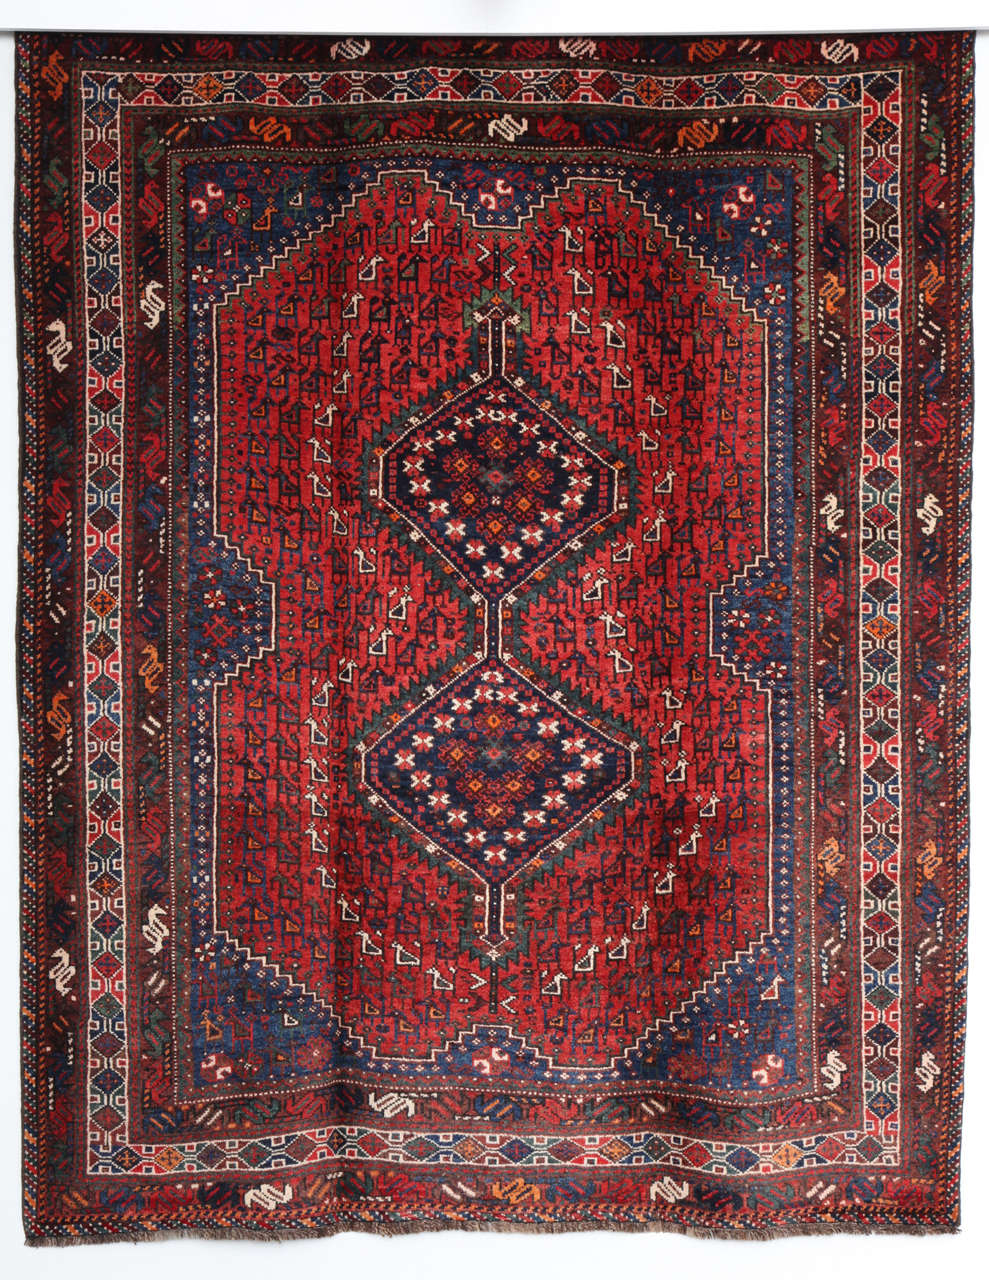 This Persian Qashqai carpet, circa 1920 consists of a pure handspun wool warp, weft and hand-knotted pile and organic vegetable dyes. Its geometric design is exceptionally detailed and balanced in both coloration and proportion. Exhibiting rich